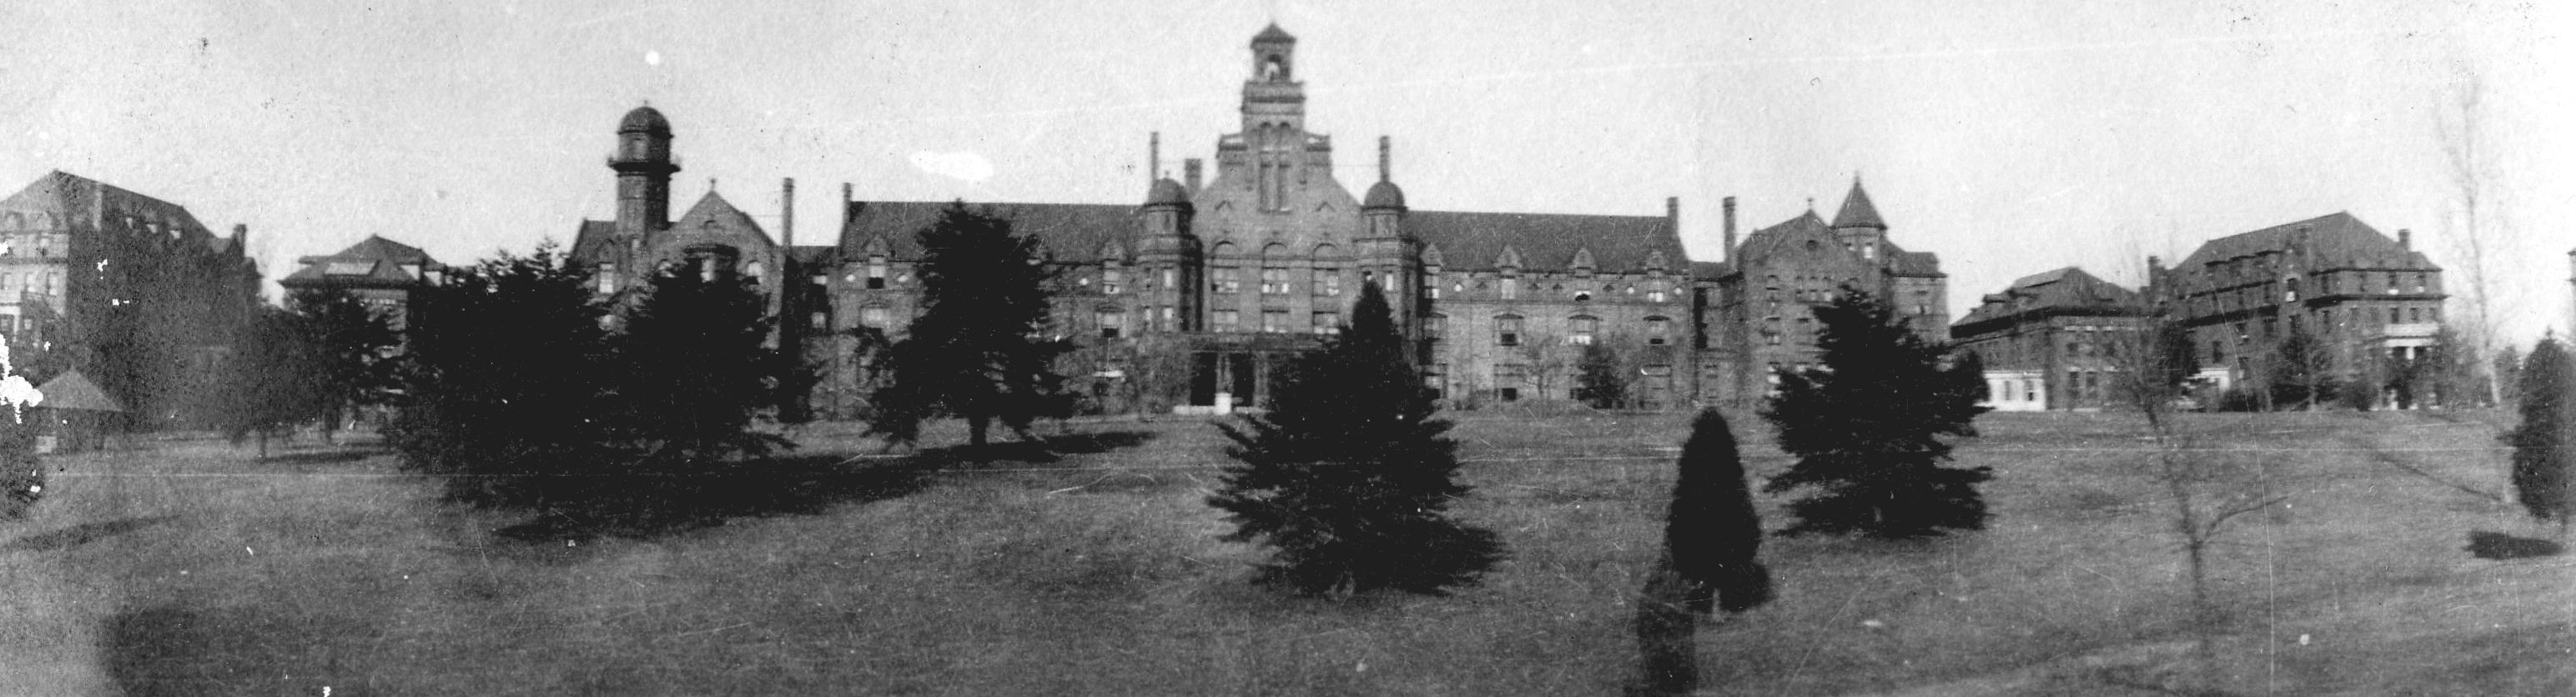 Photo of Randolph College in the early 1900s.